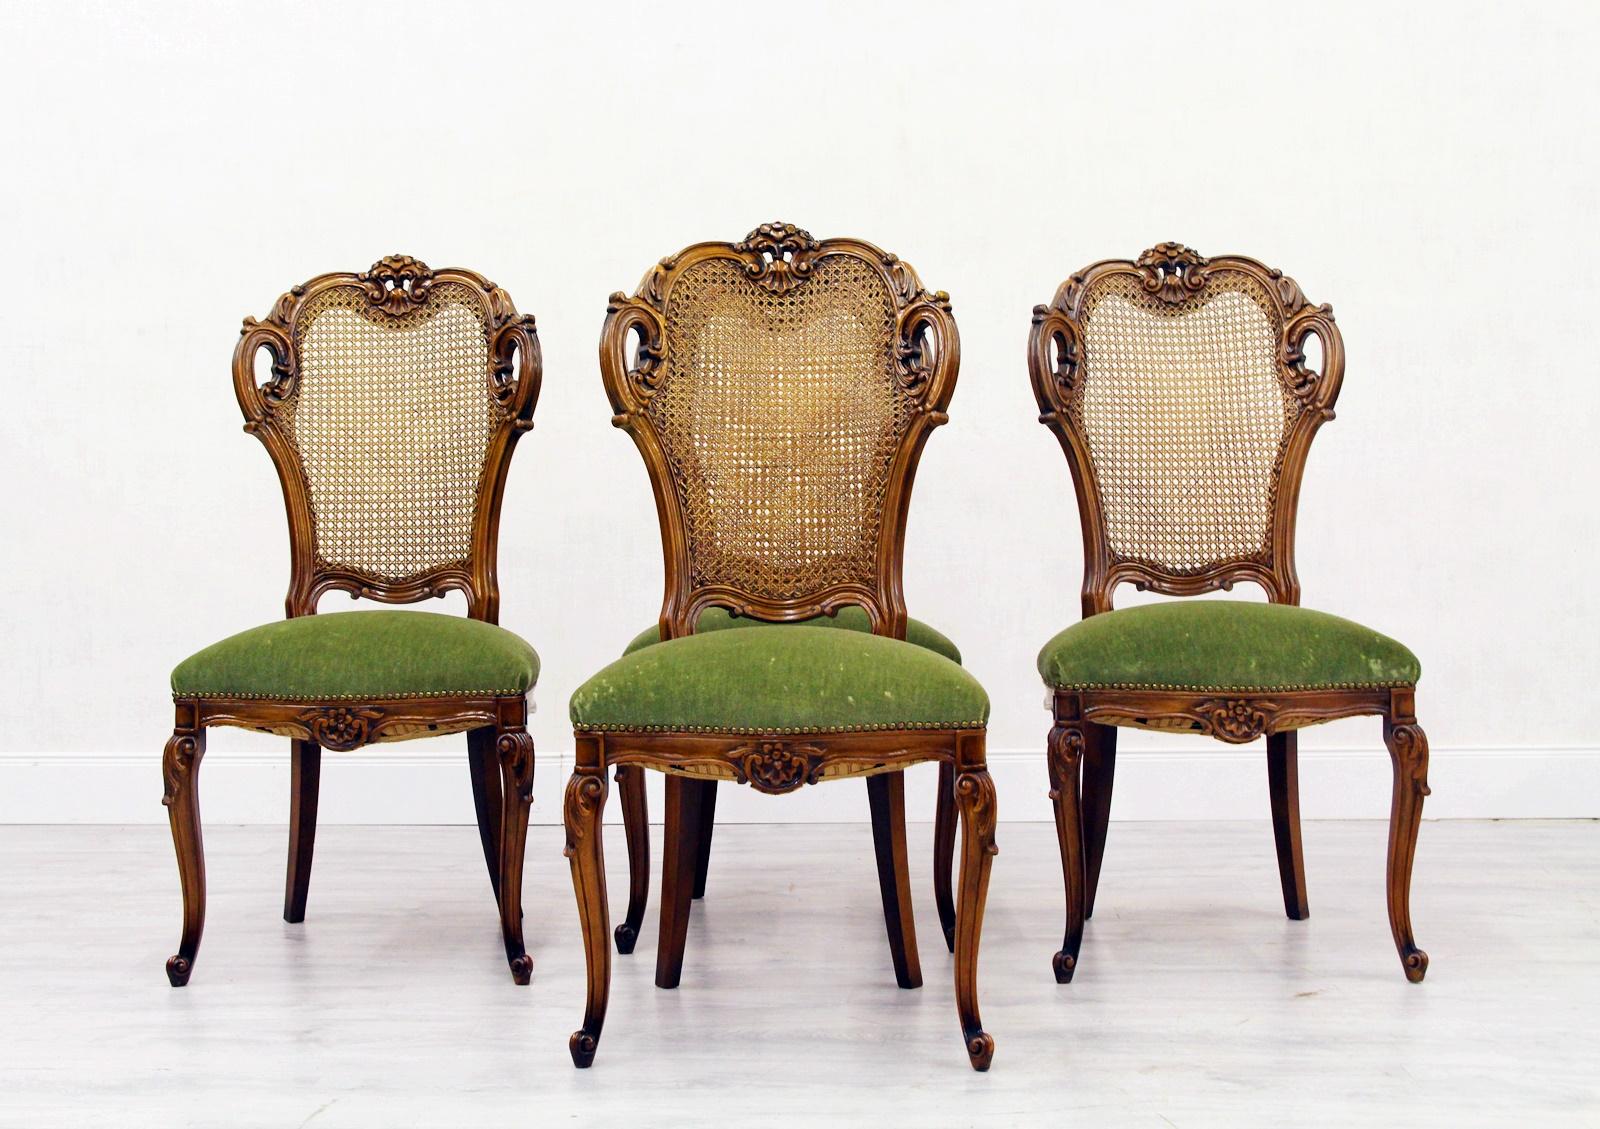 4 baroque or Chippendale chairs.
Press hard!!!
Condition: The chairs are in a very good condition for the age and still has the charm of the 